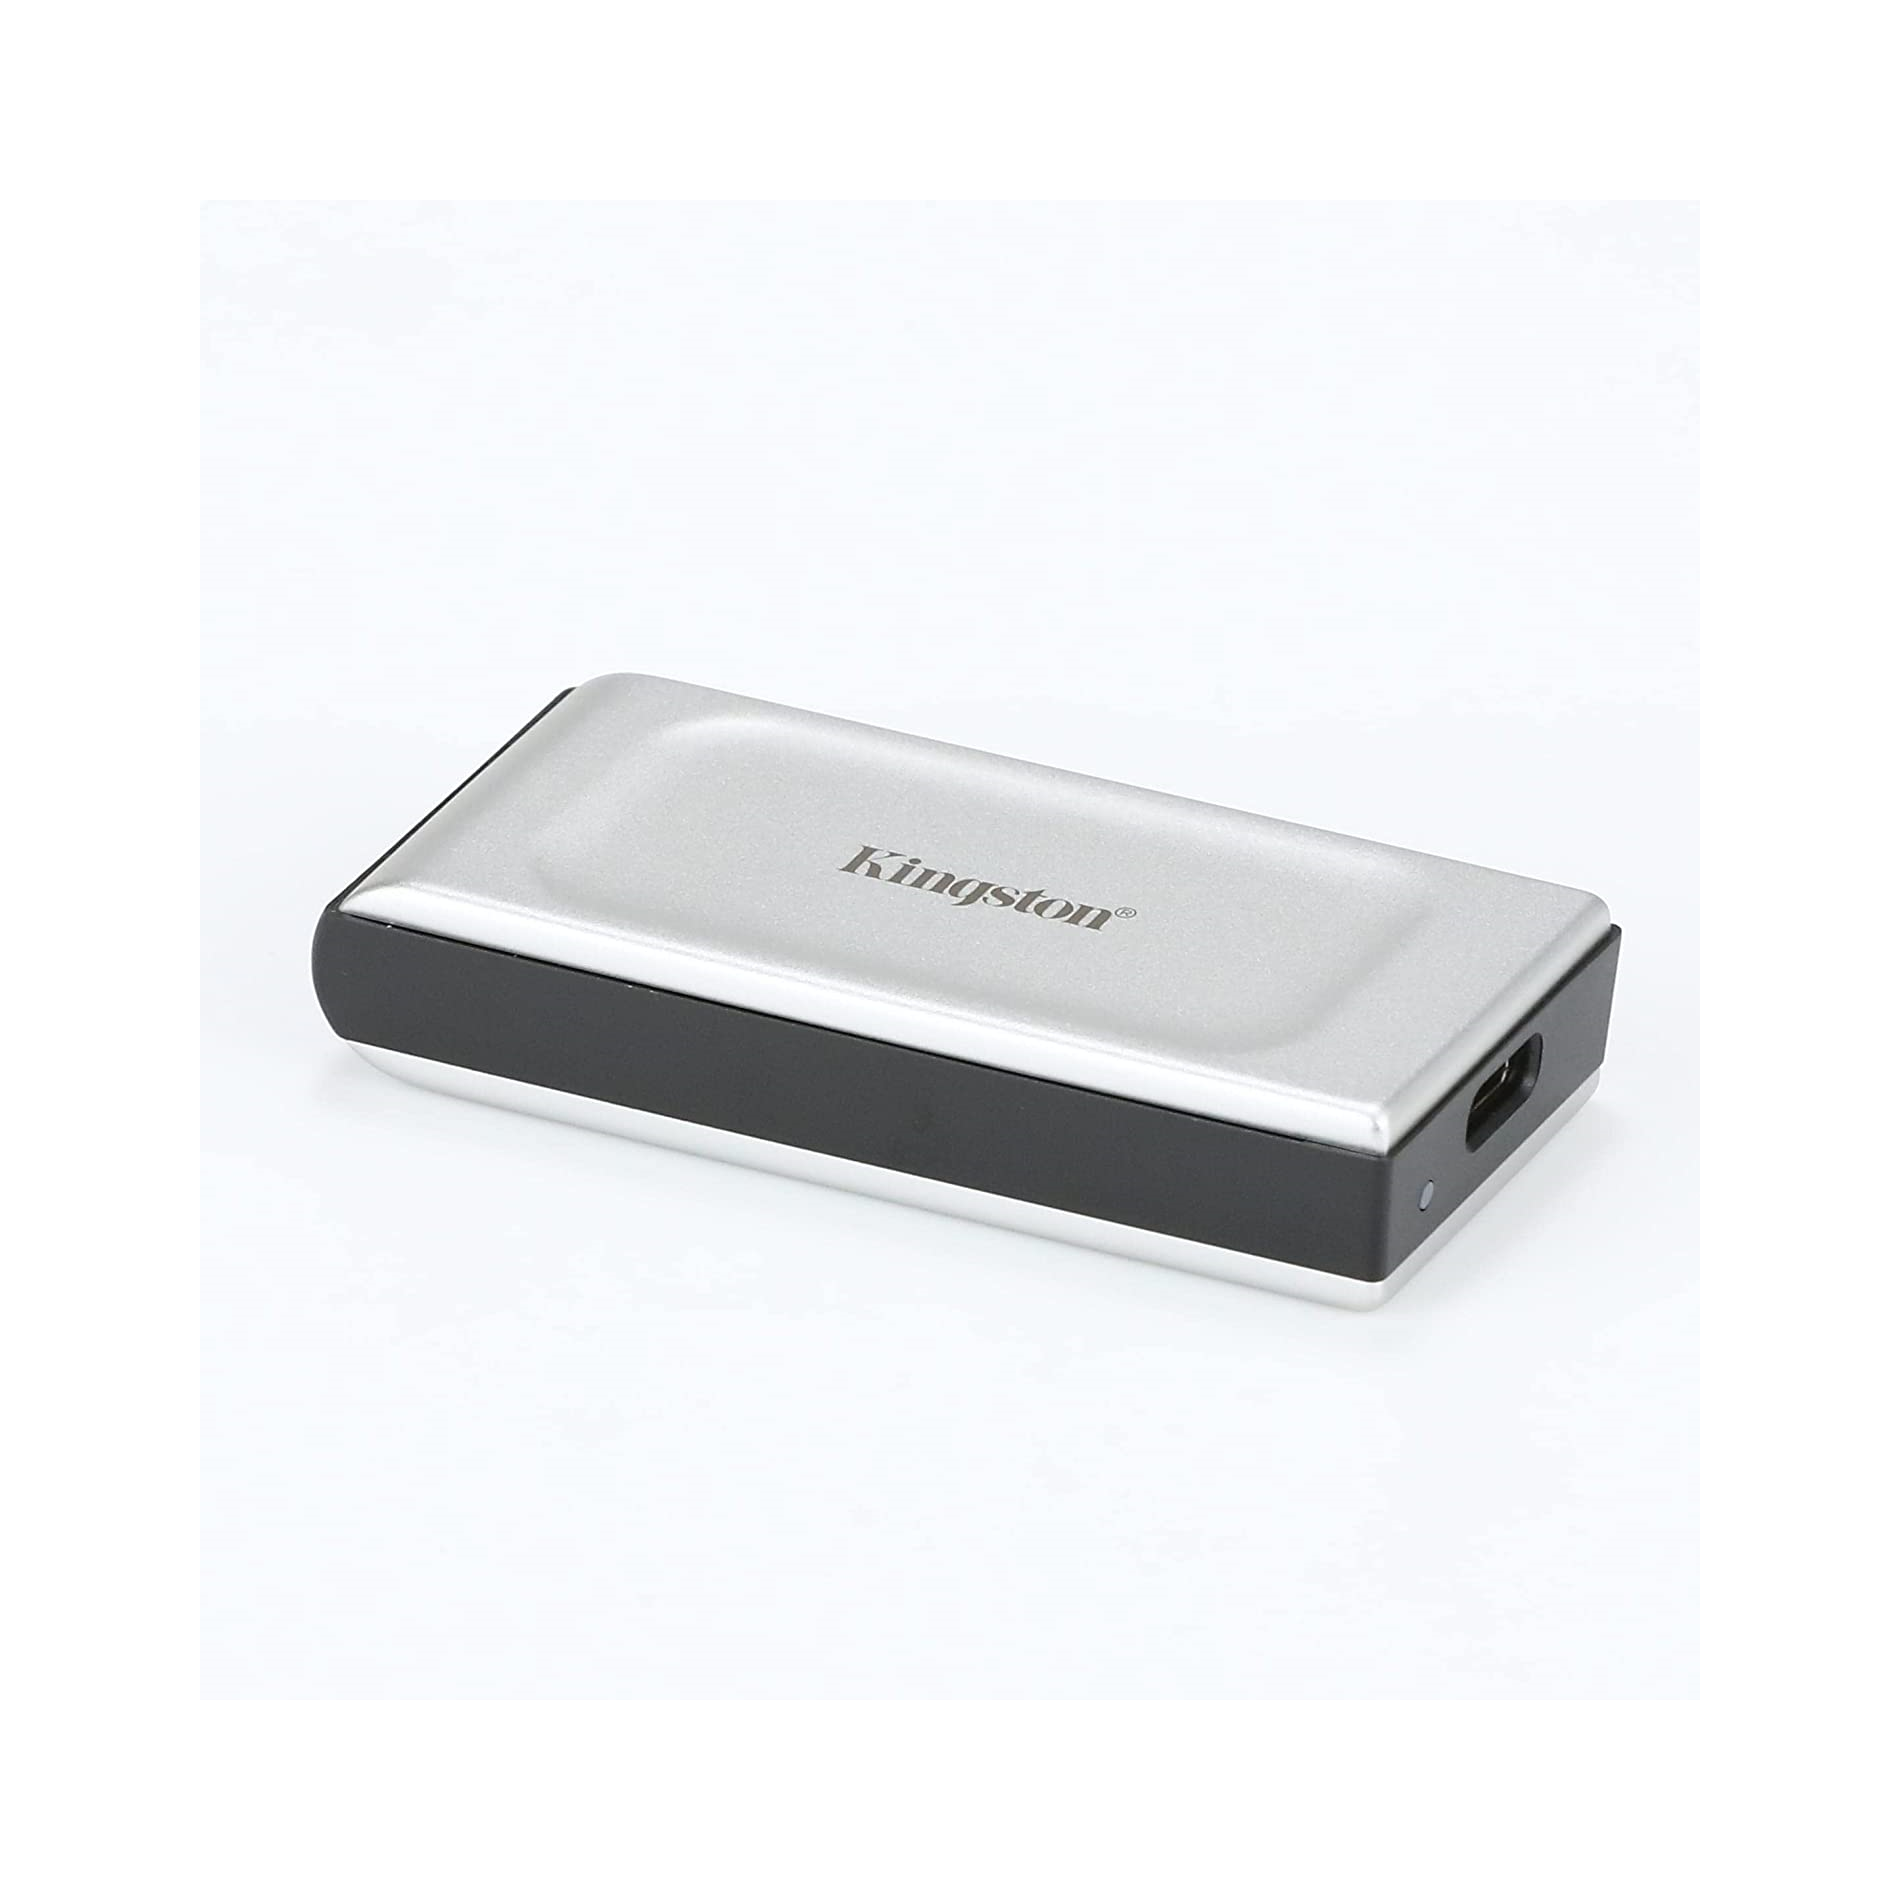 Kingston XS2000 High Performance, Read/Write speeds up to 2,000MB/s, Pocket-Sized Most Portable External SSD SXS2000, with Type C Lightweight 29Gram Only, Silver